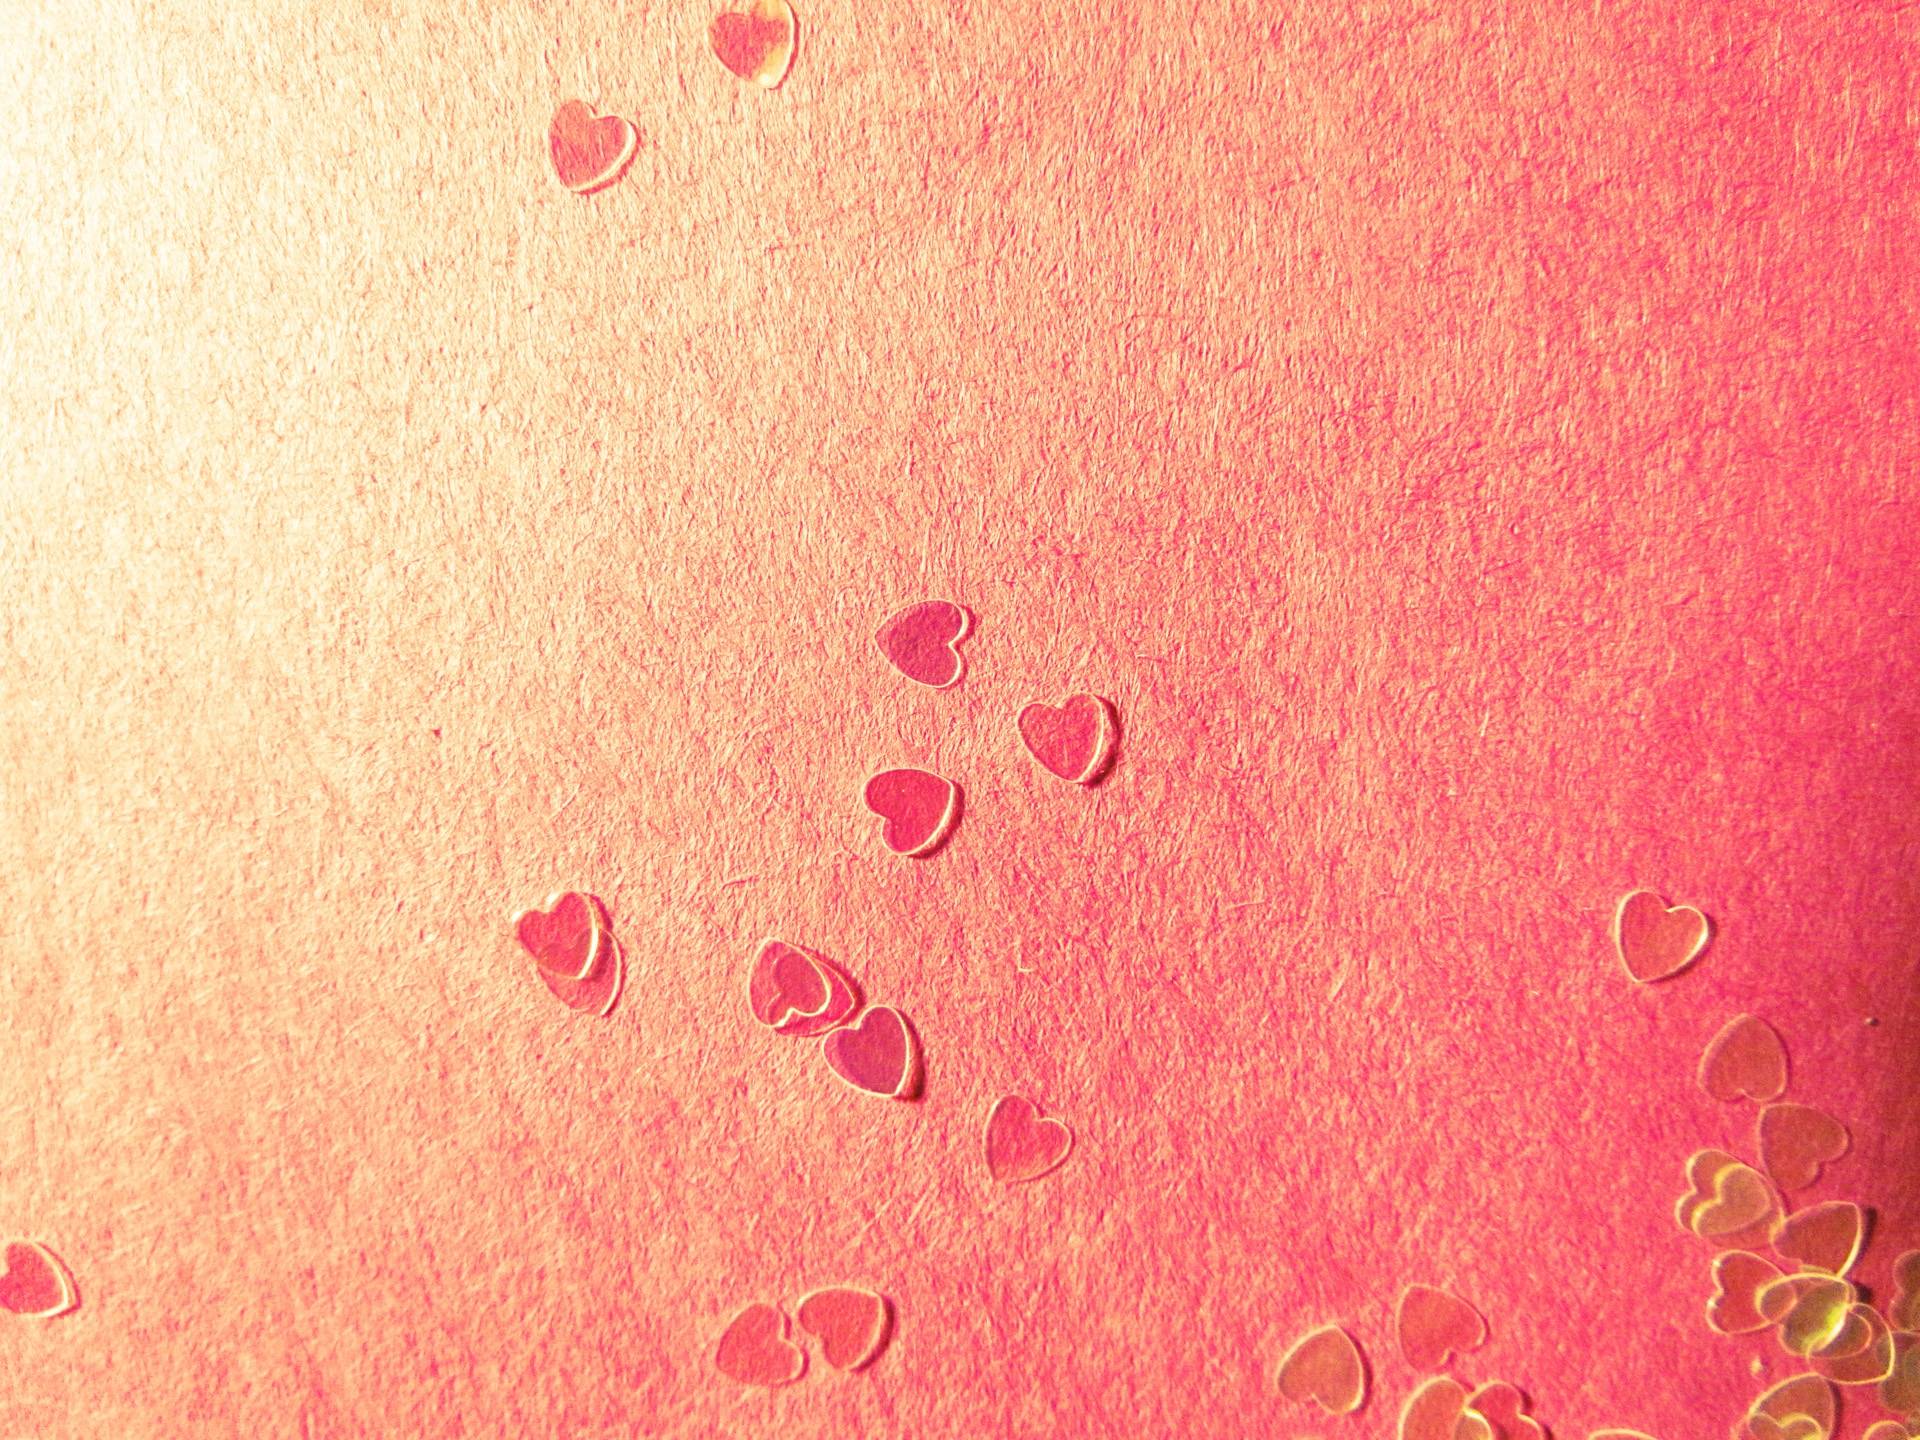 Cool Love Background 18164 1000x704 px